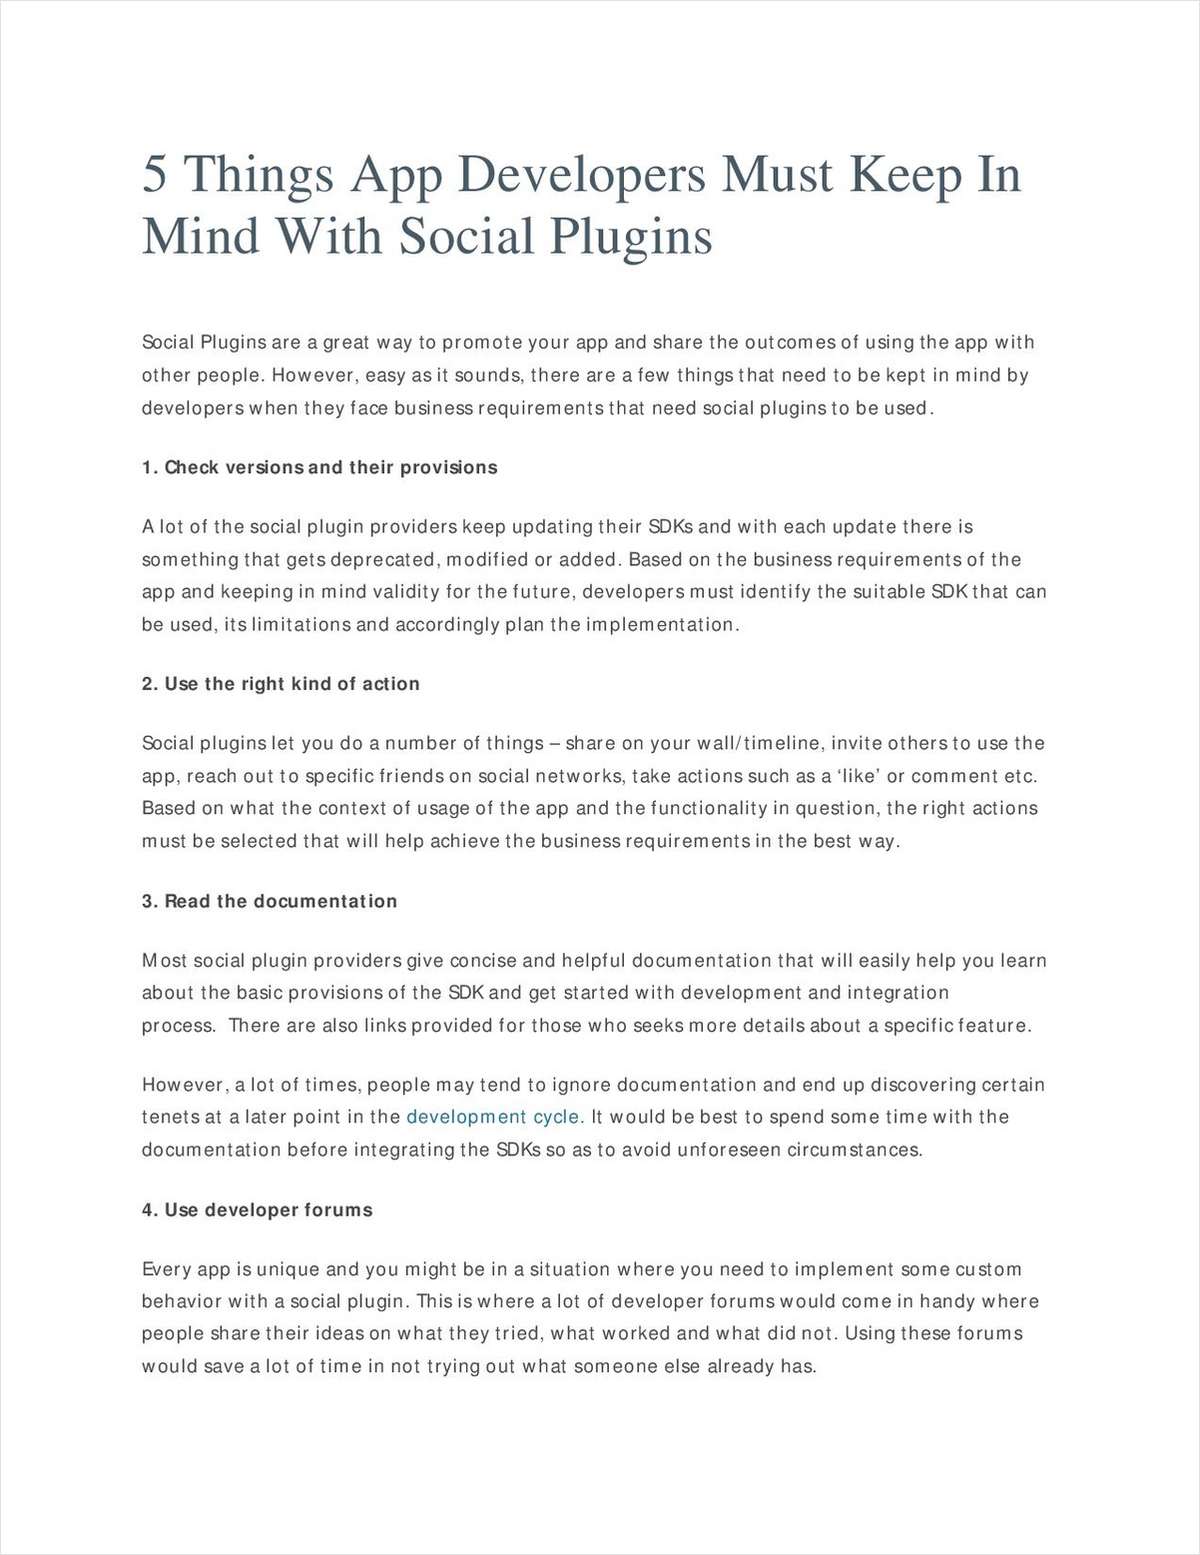 5 Things App Developers Must Keep In Mind With Social Plugins